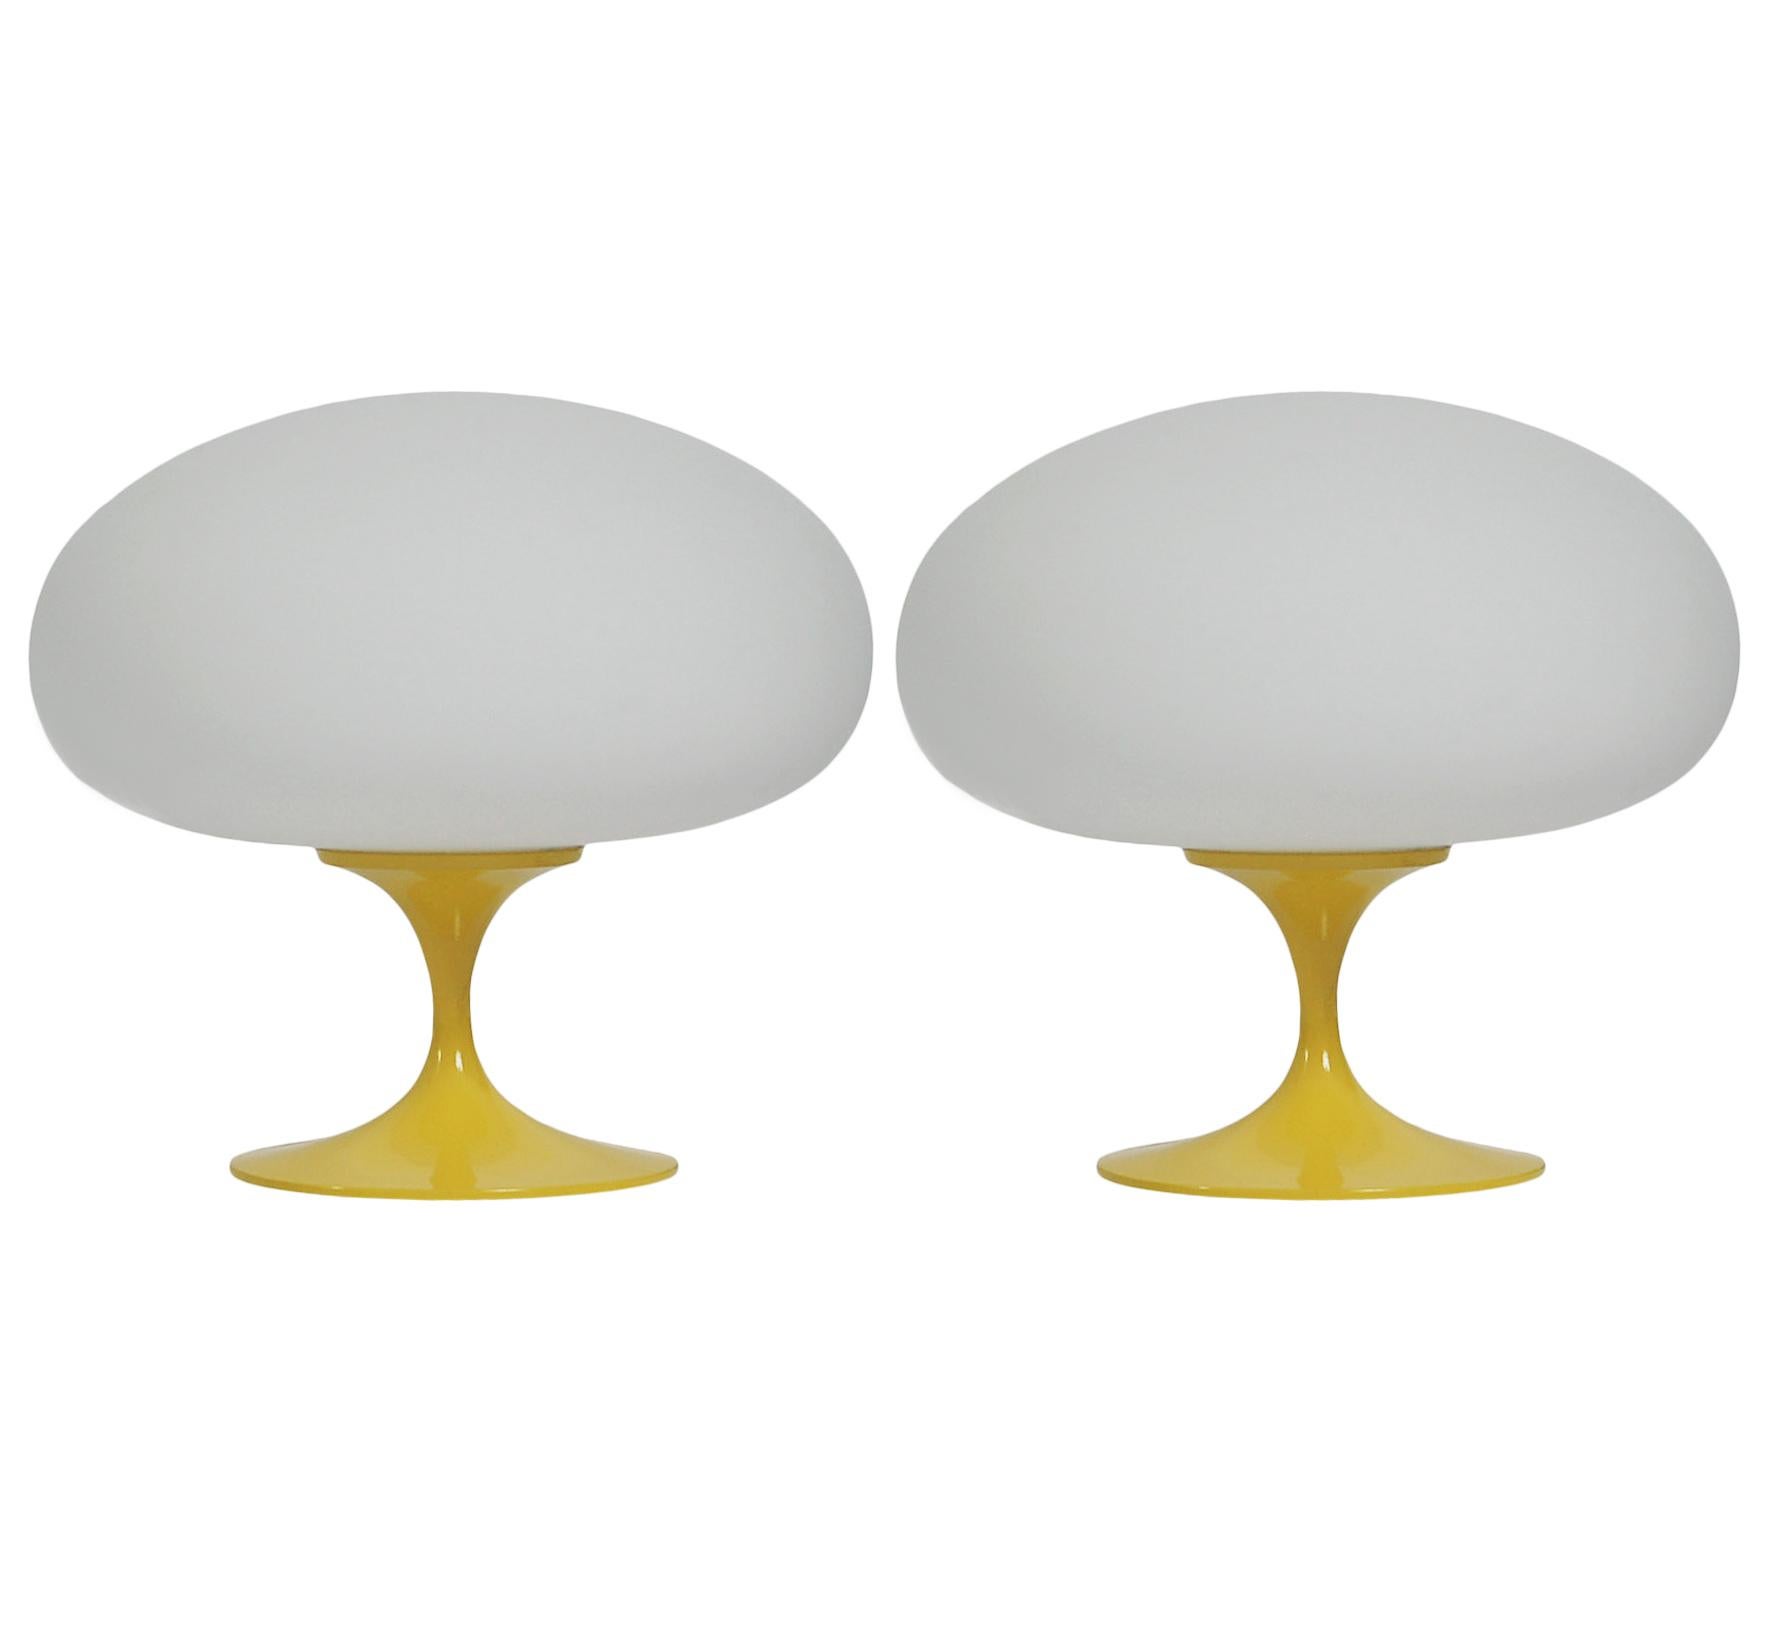 Mid-Century Modern Pair of Mid Century Tulip Mushroom Lamps by Designline in Yellow & White Glass For Sale